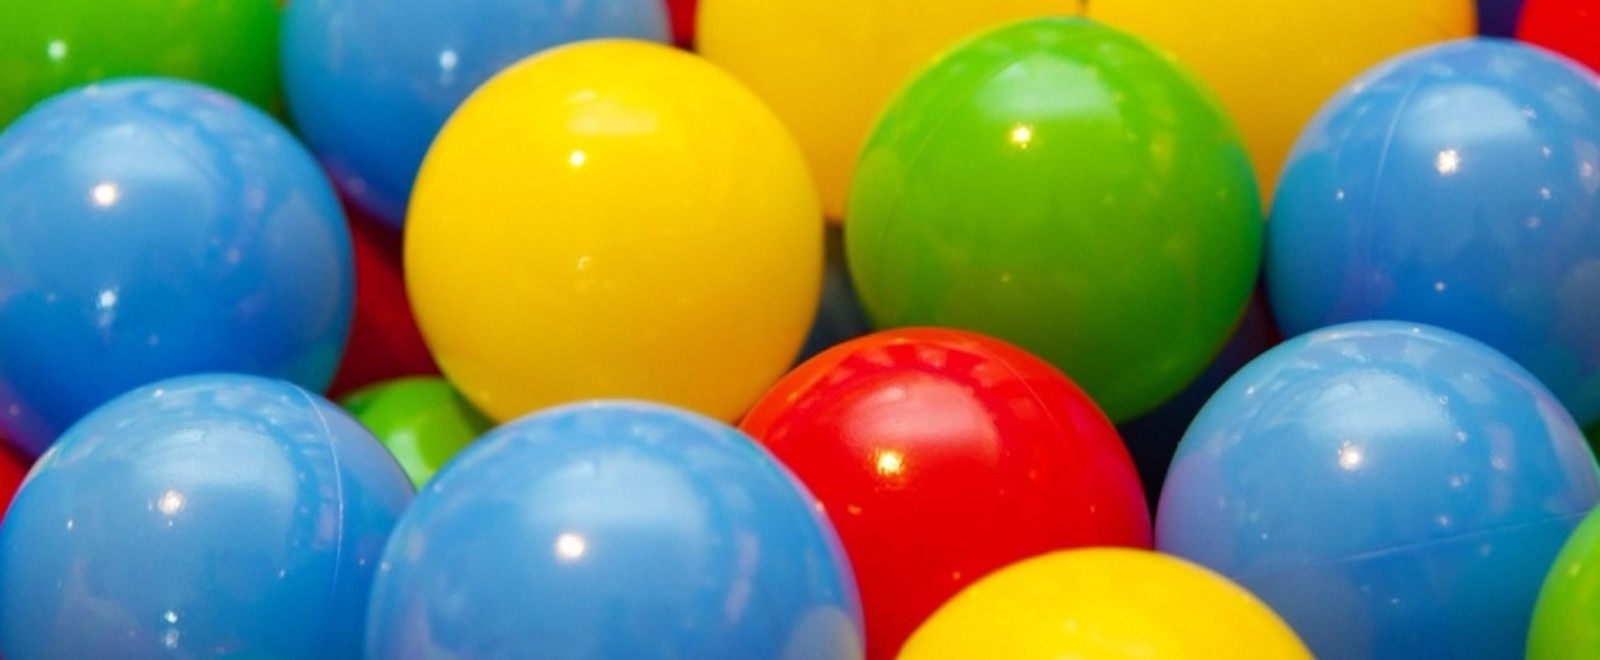 Colourful balls from The community ball pool event.